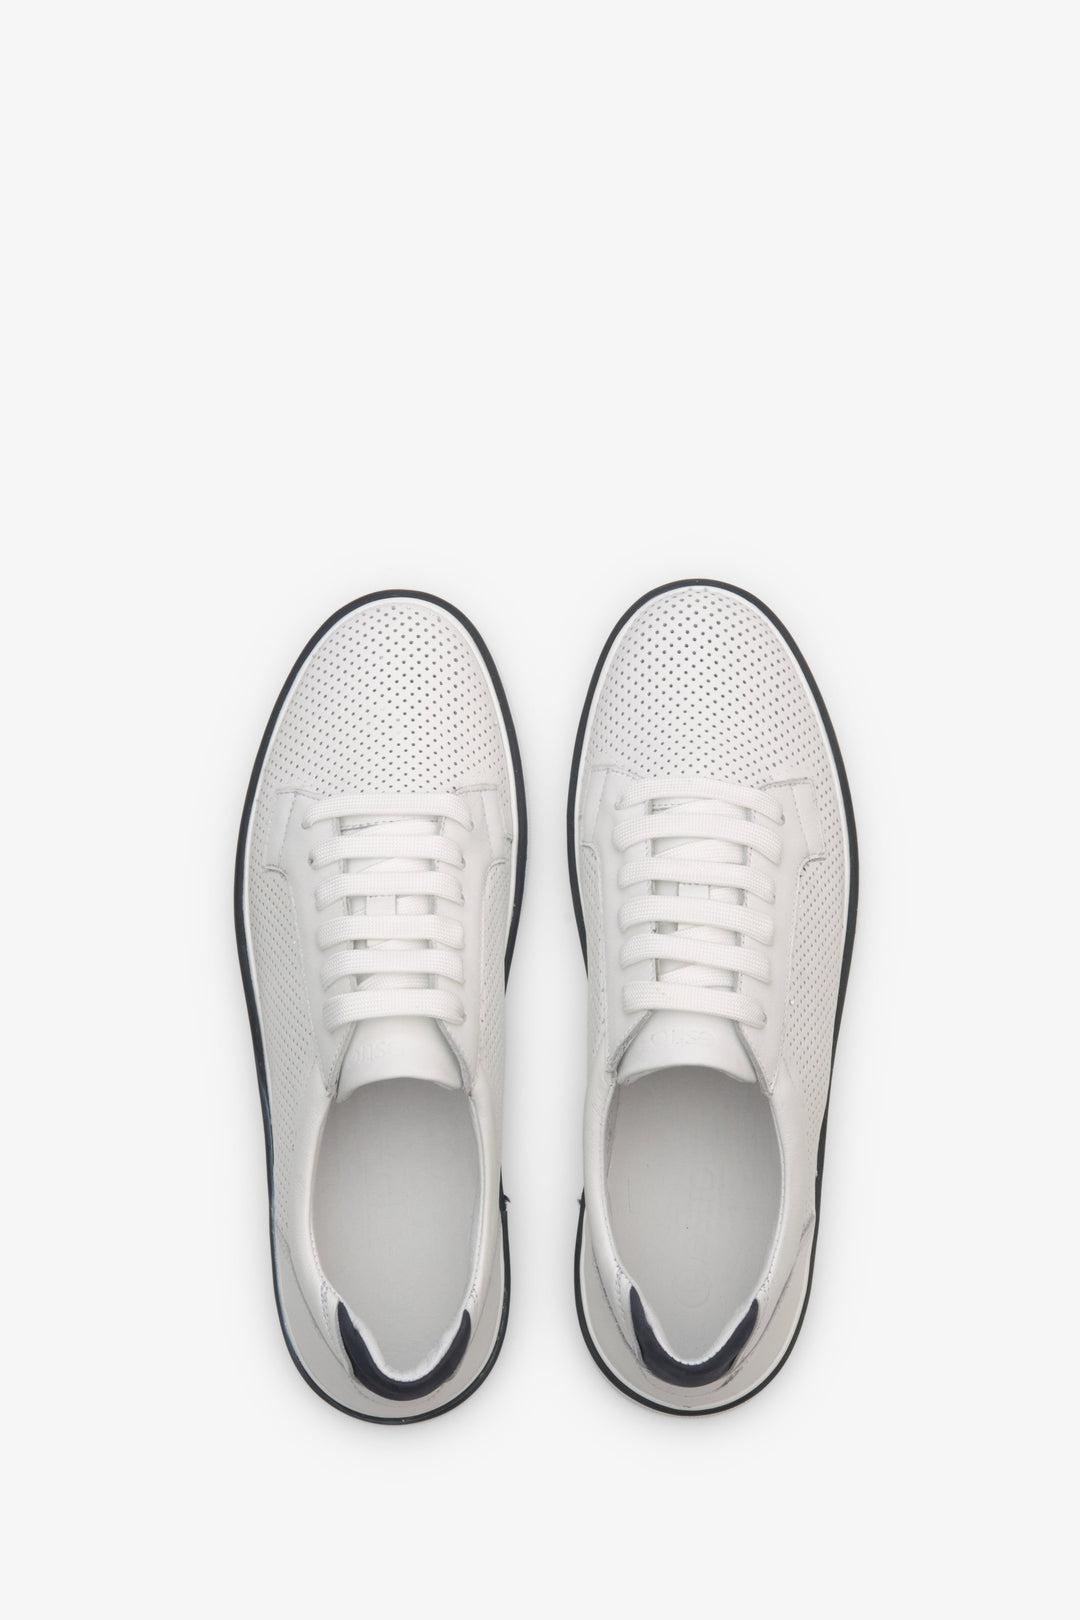 Men's leather sneakers for summer in white color with perforation - presentation of shoes from above.